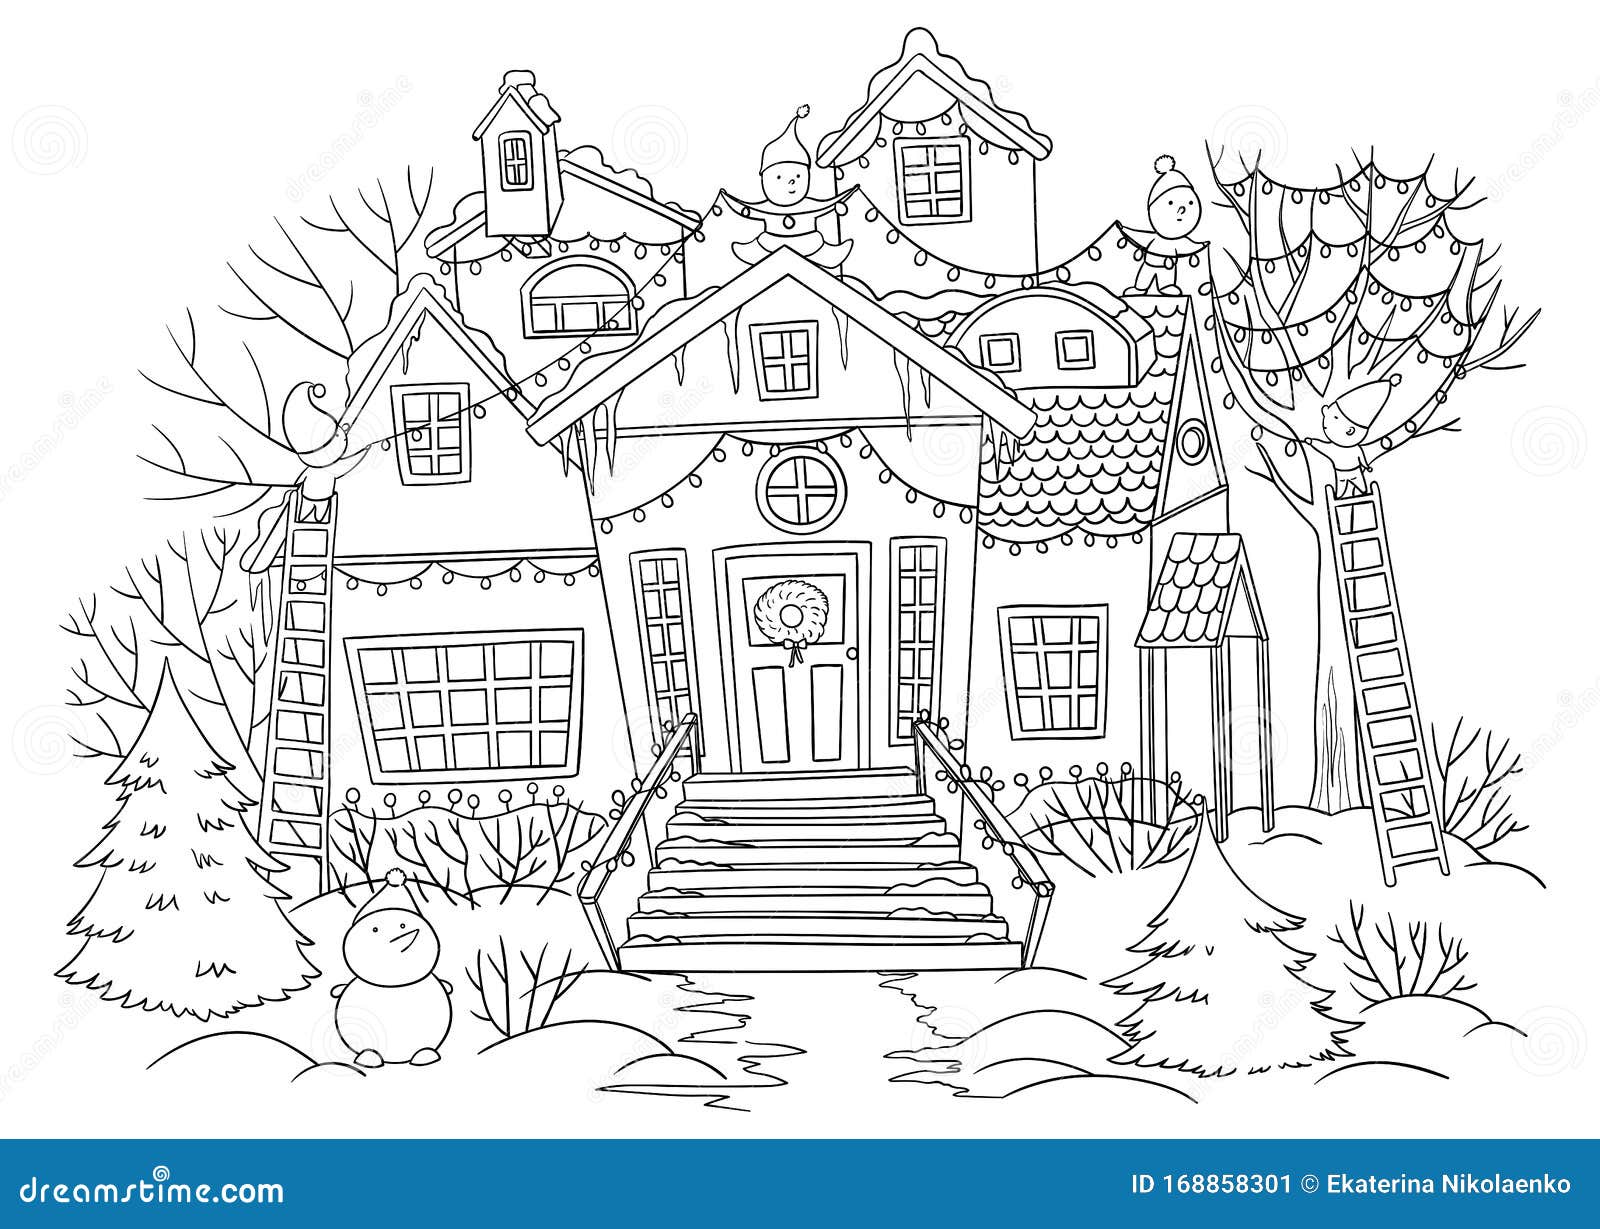 Gnomes Decorating House With Christmas Lights Outdoors Snowy House Fir Trees Snowman In Christmas Holiday Season Coloring Page Stock Vector Illustration Of Cartoon Black 168858301